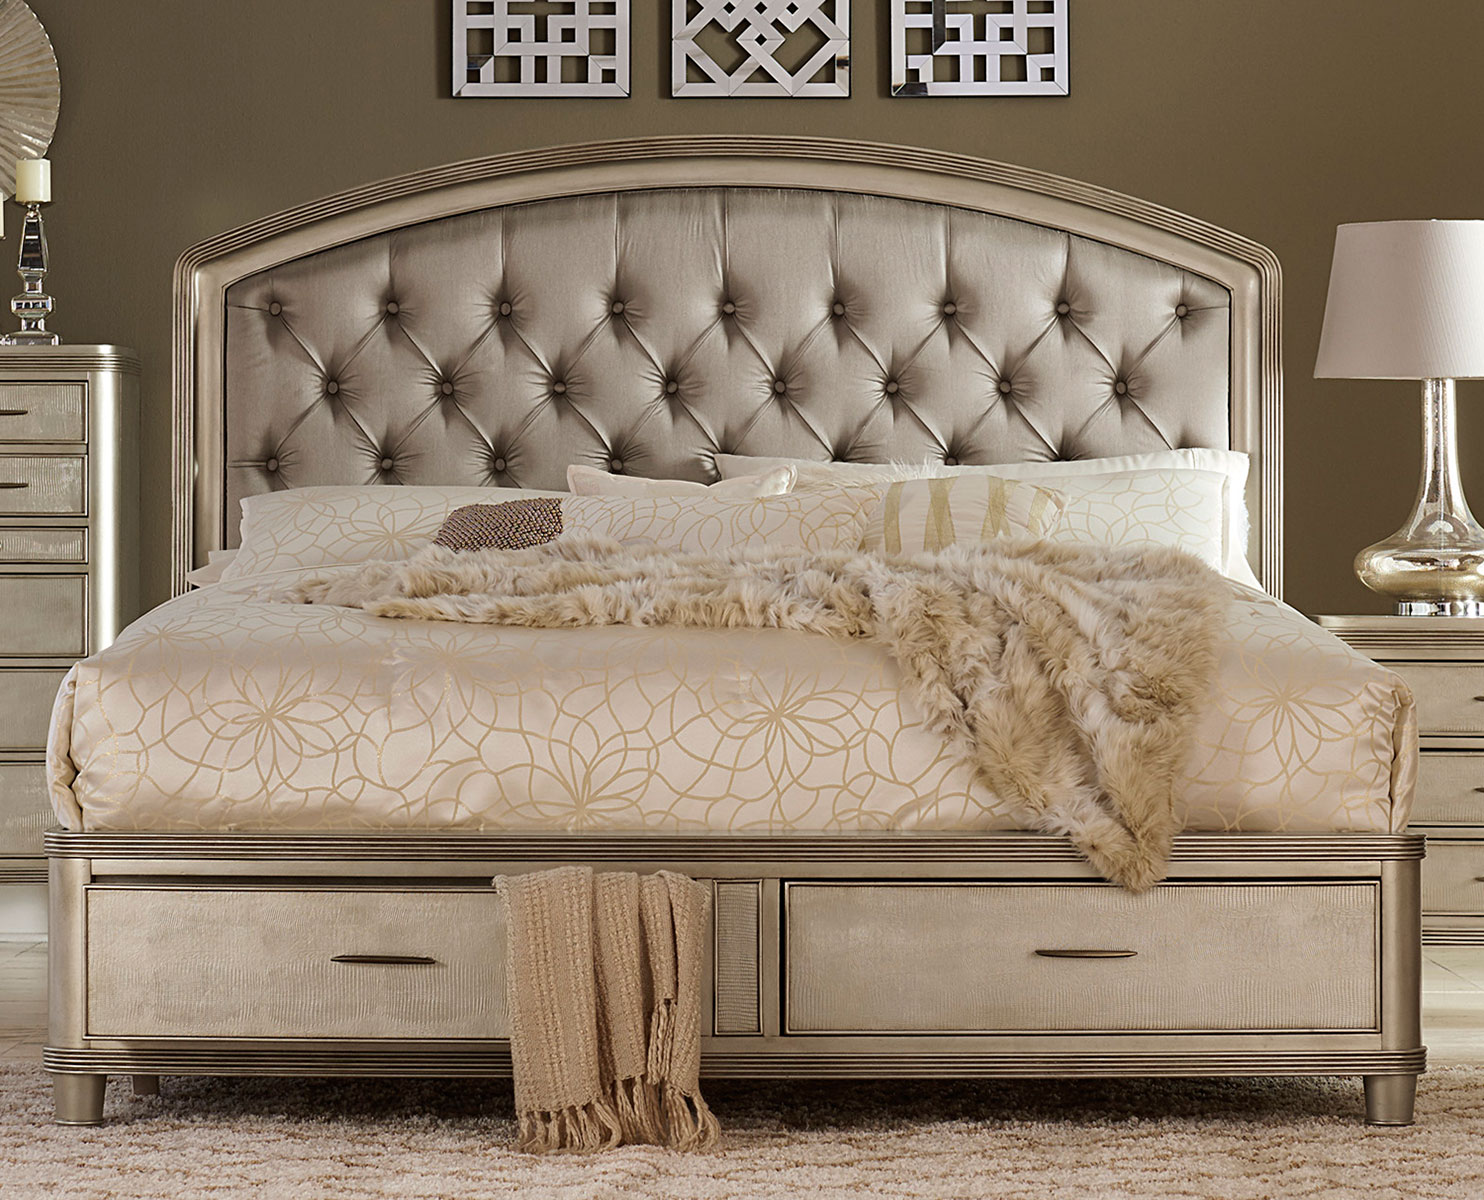 Homelegance Tandie Button Tufted Upholstered Platform Bed with Storage - Champagne